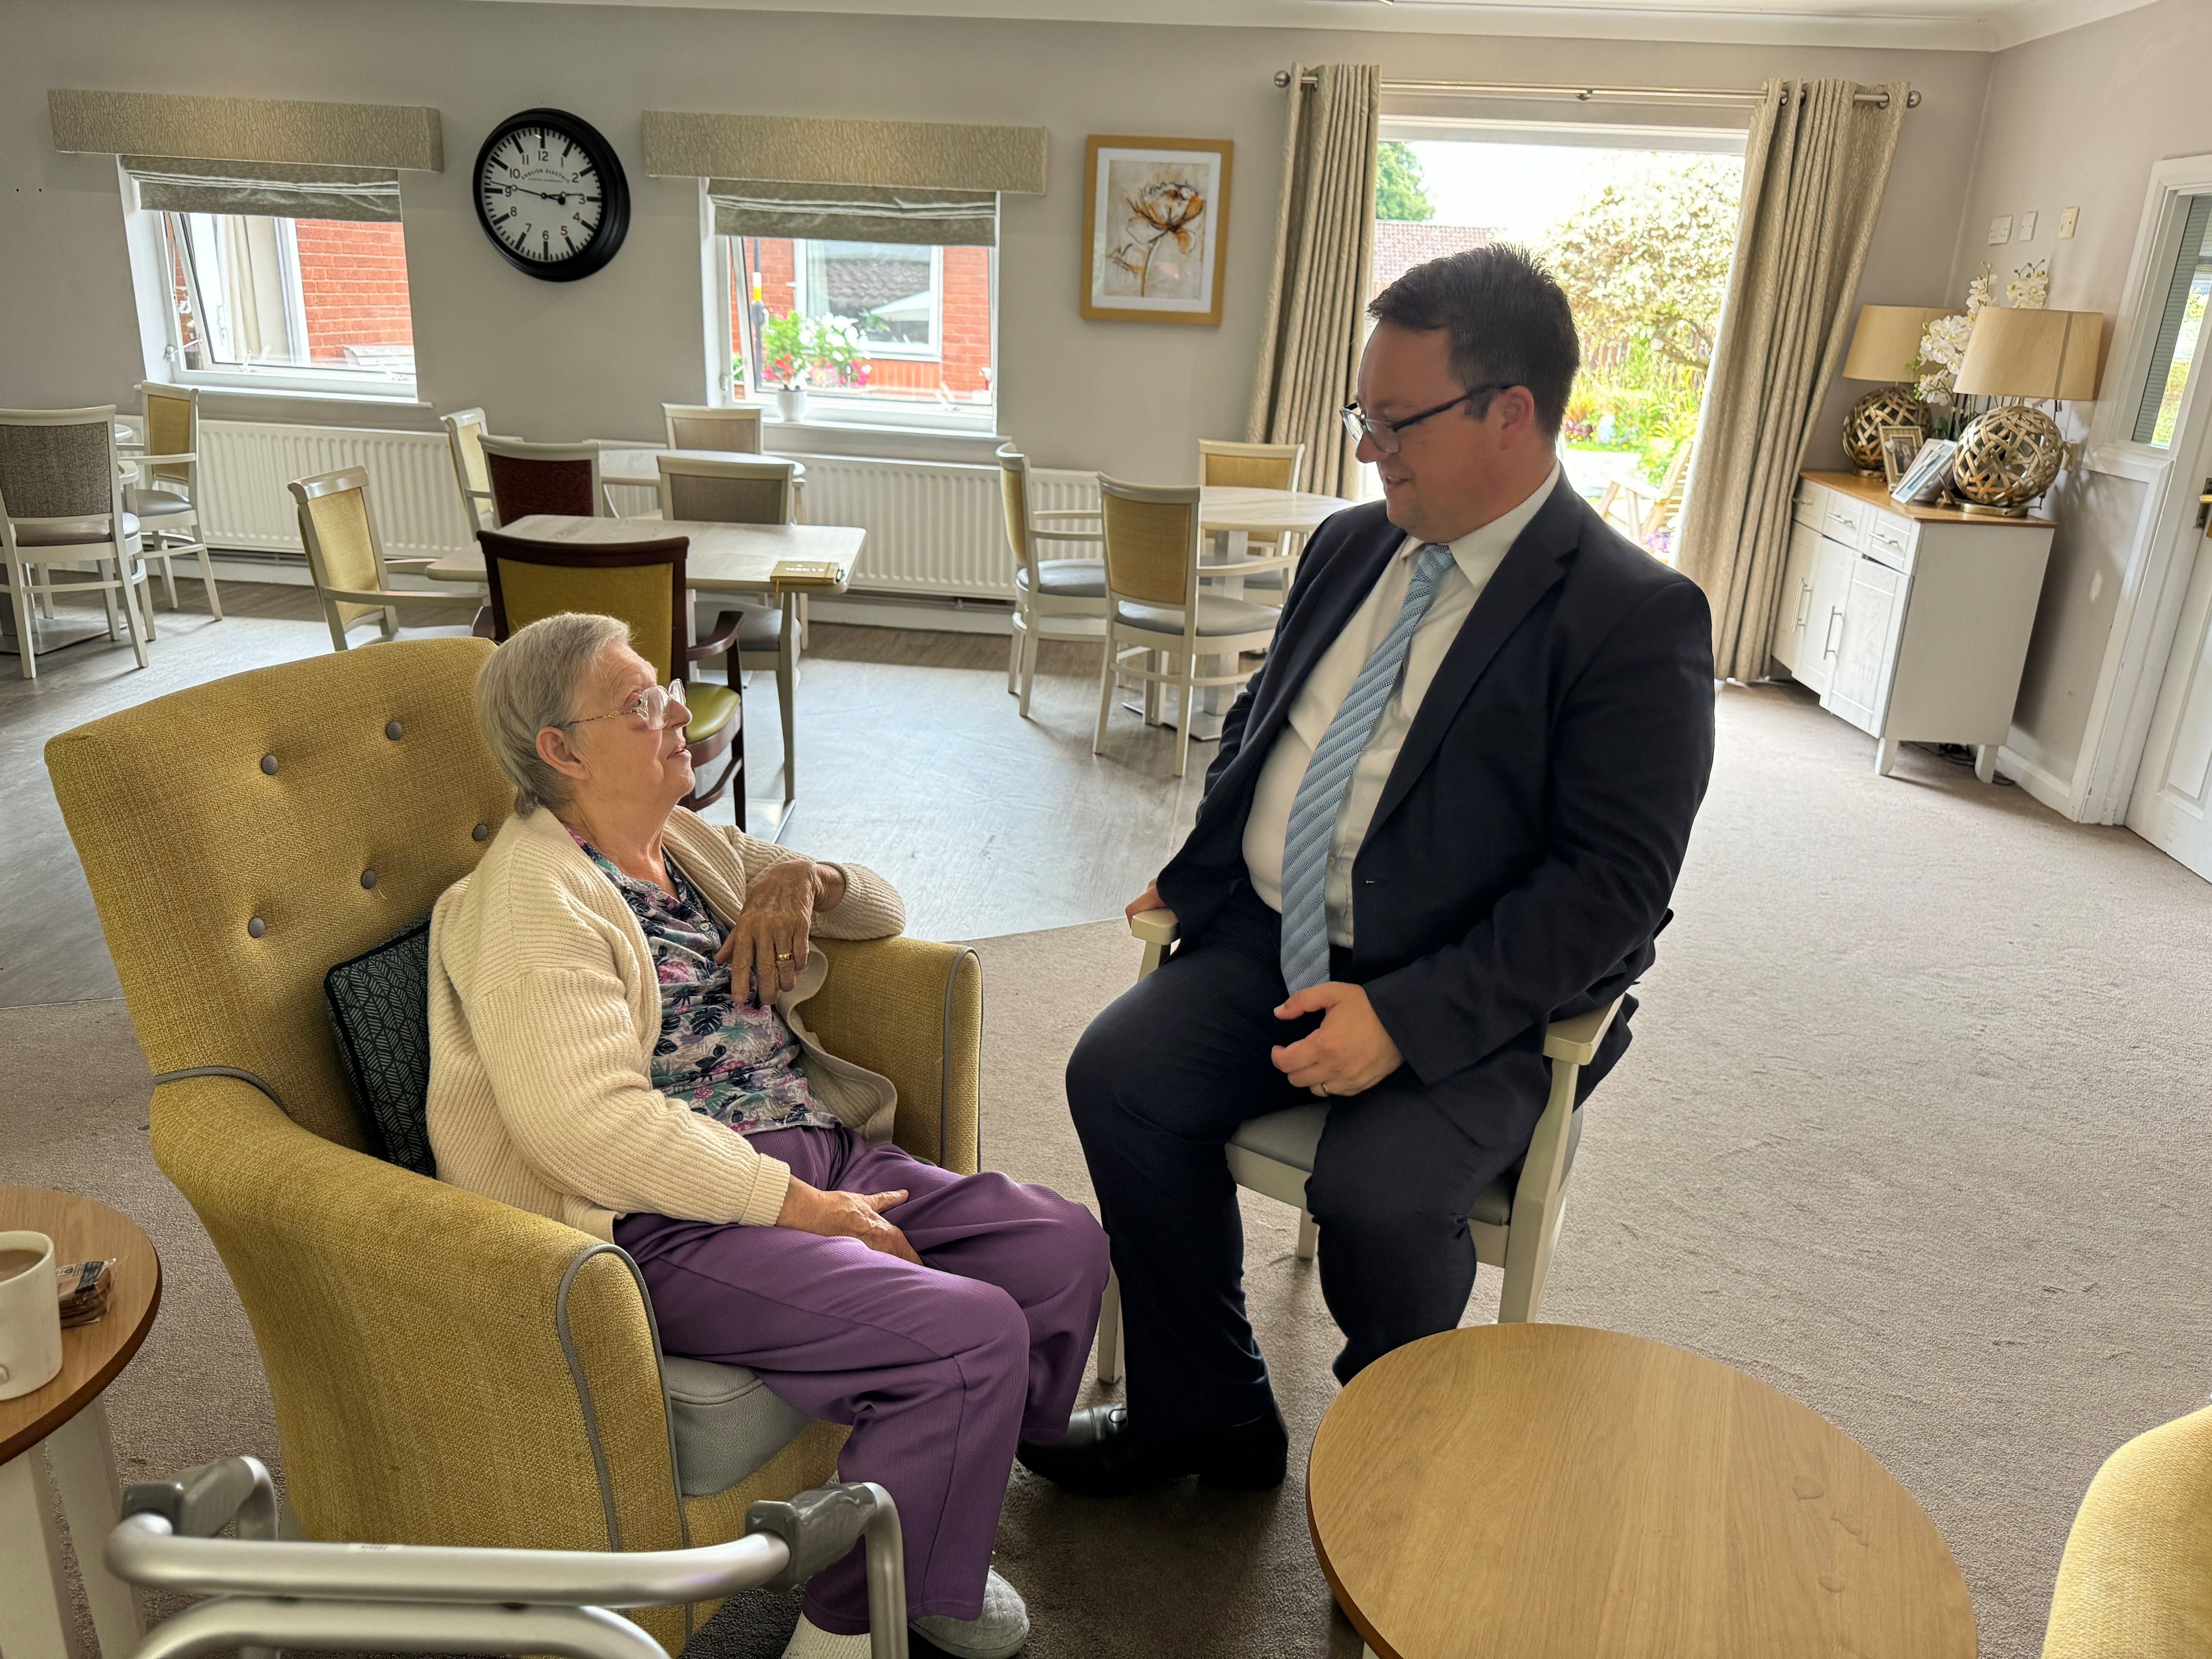 Local MP visits residents at ‘wonderful’ Dudley care home